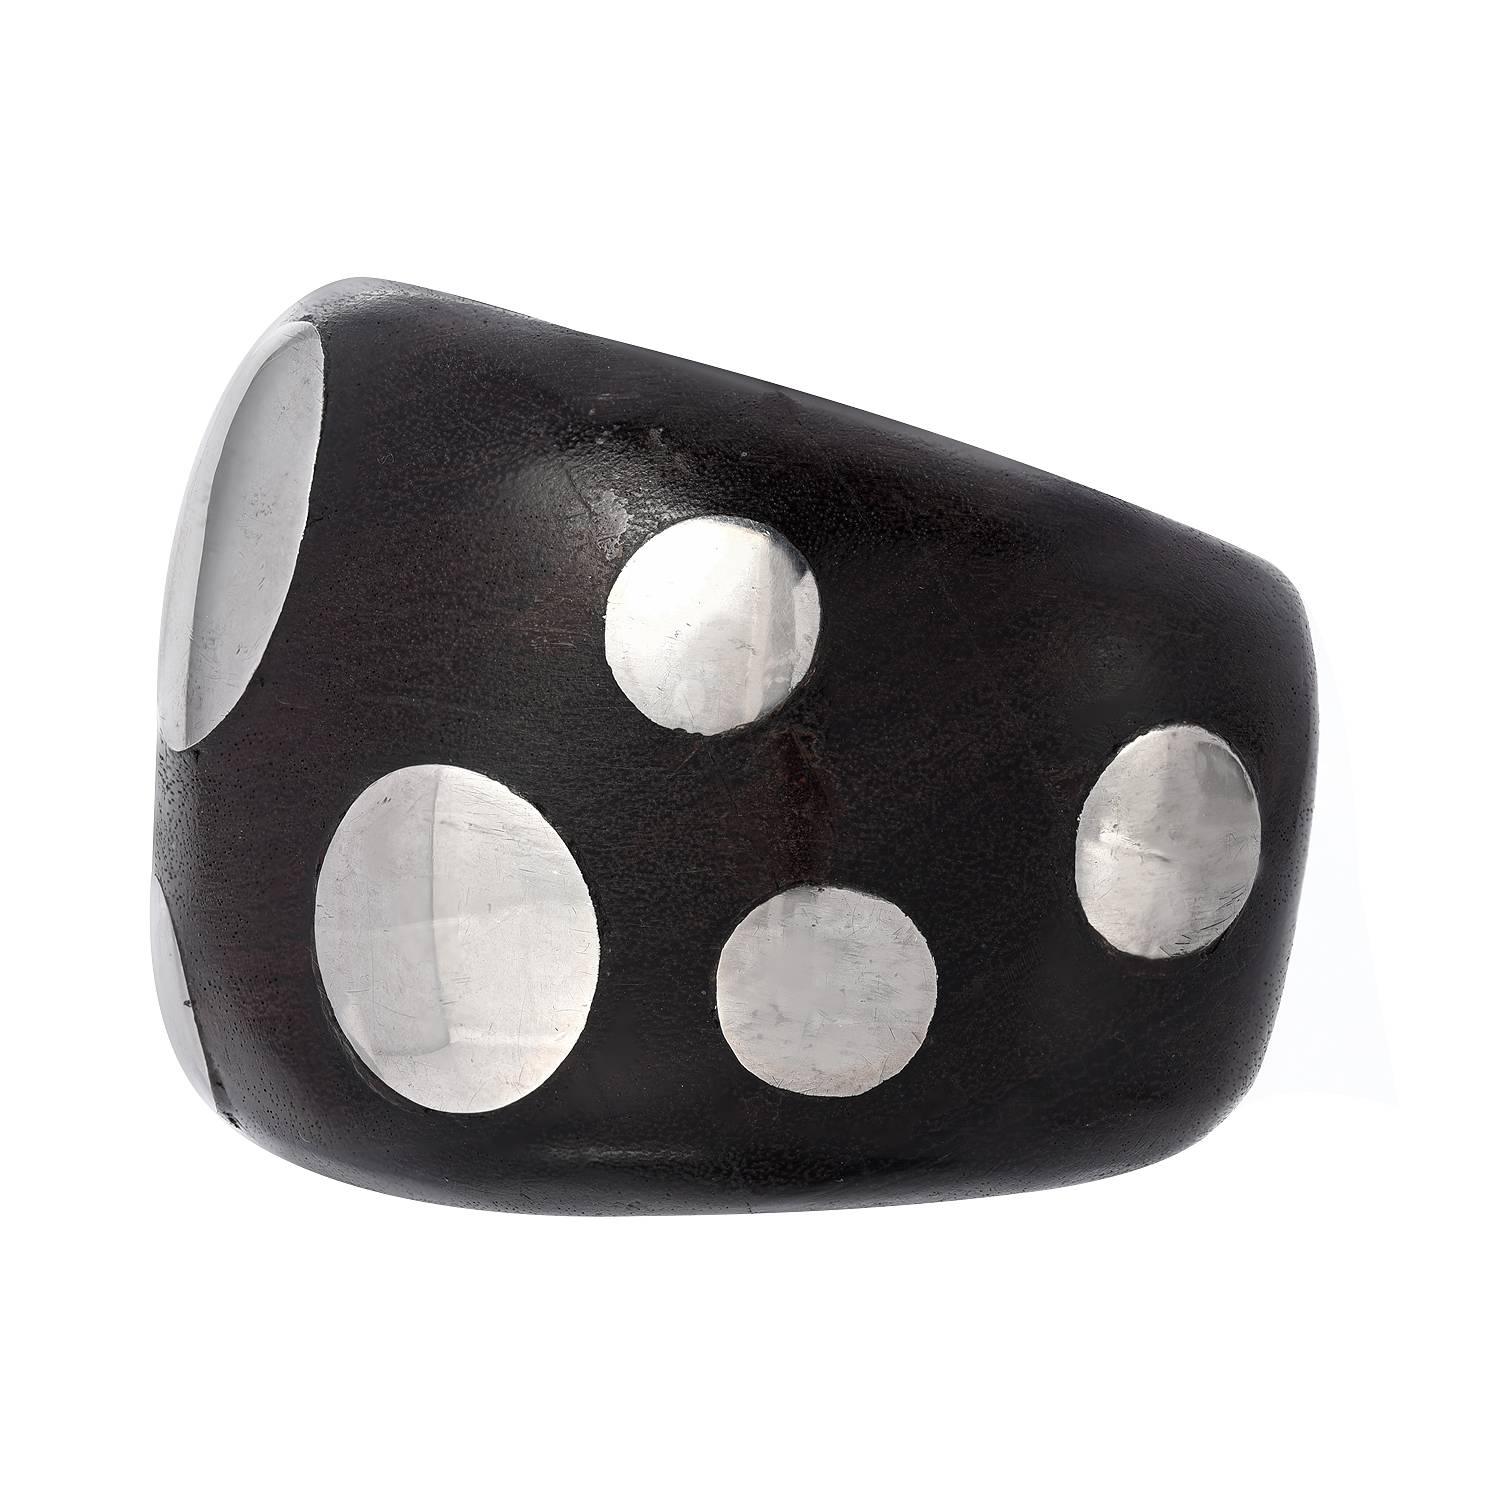 Designed as an ebony cuff, inlaid with silver discs